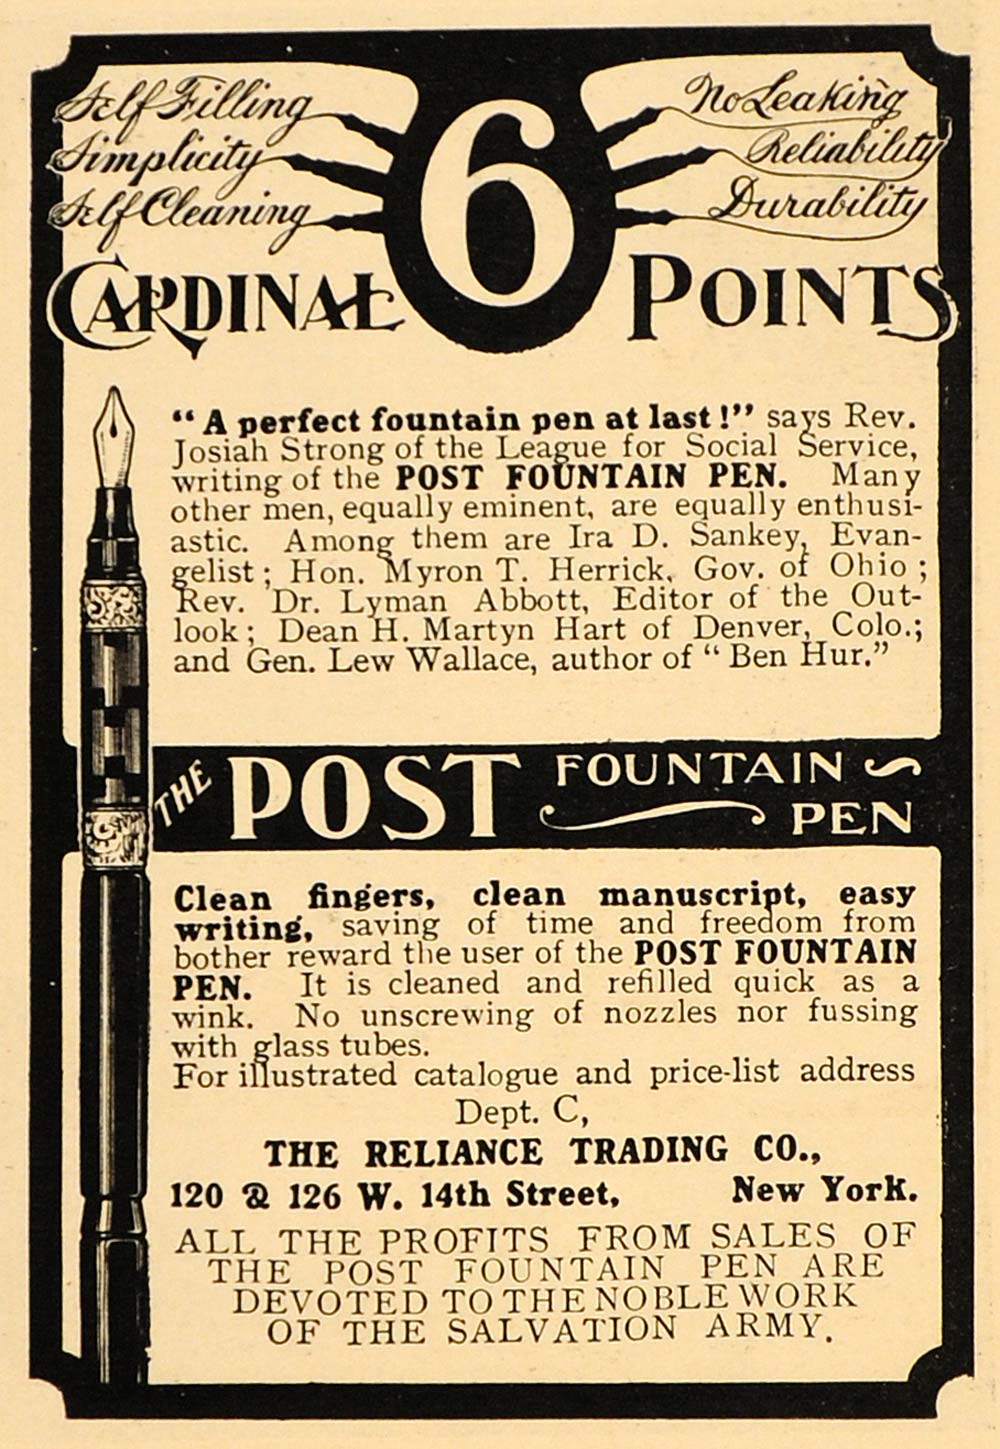 1904 Vintage Ad Post Fountain Pen Reliance Trading Co. - ORIGINAL OLD3A